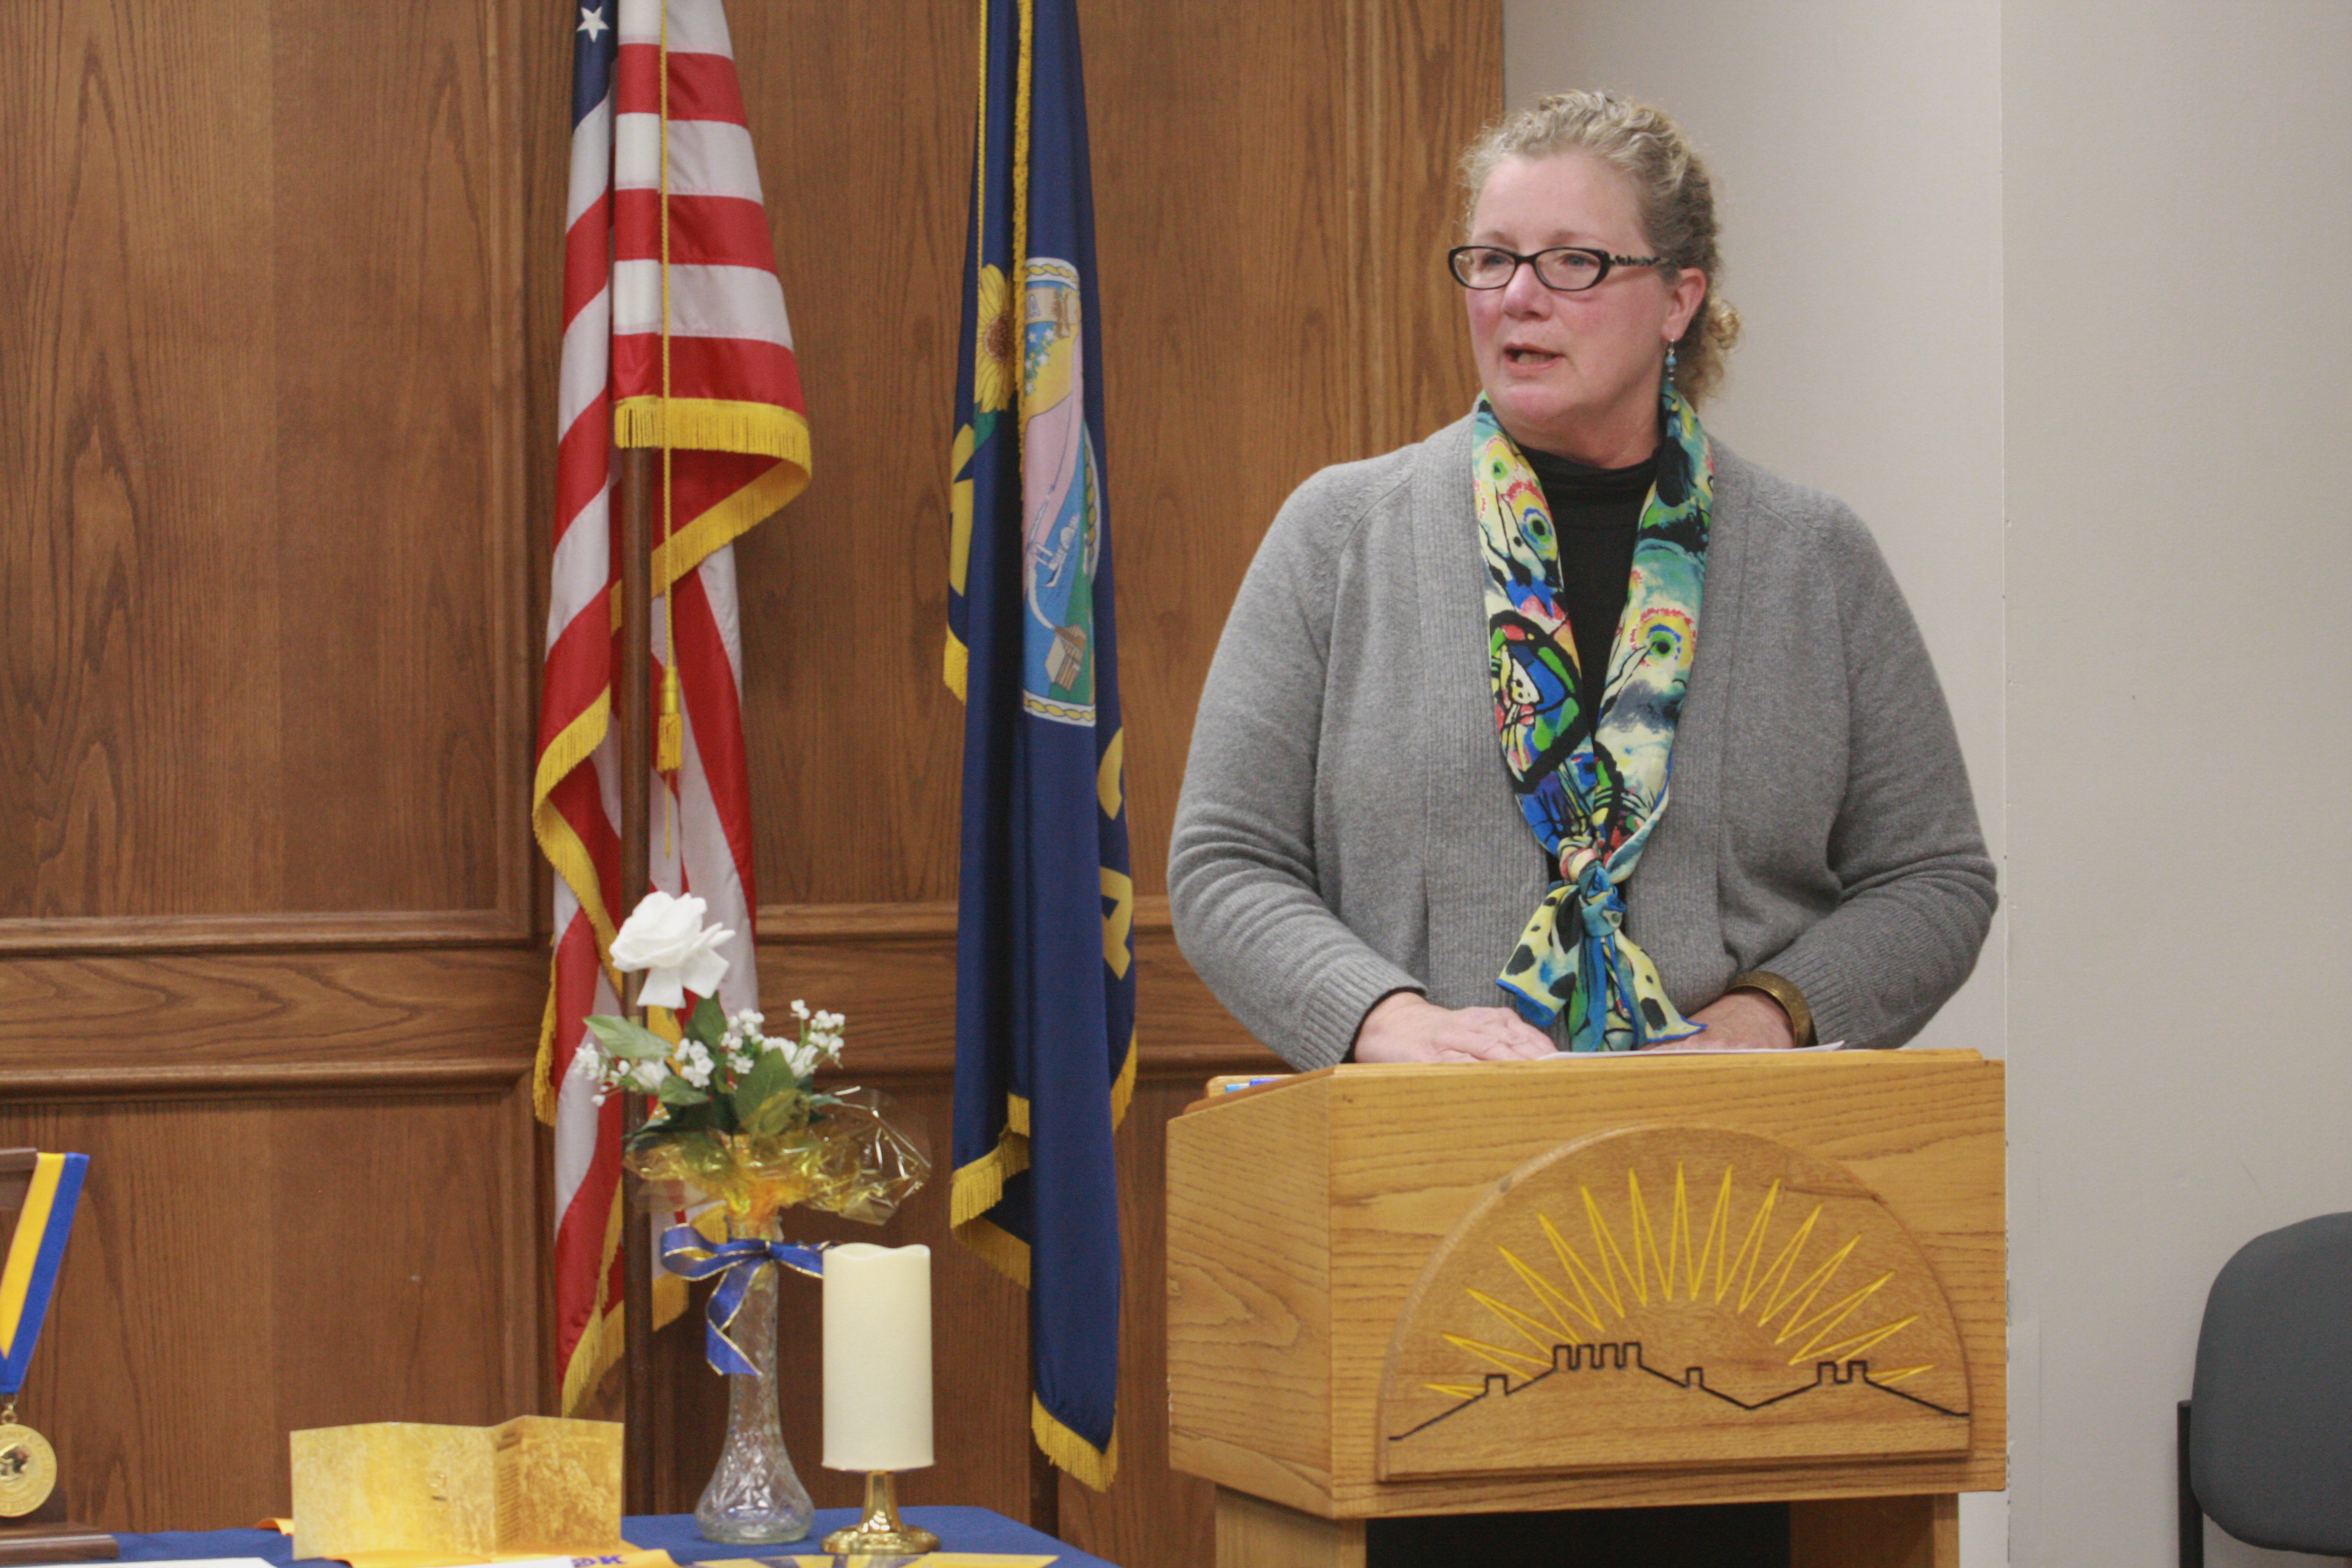 Dr. Jane Holwerda, Vice-President of Academic Affairs and PTK Advisor addresses the new inductees and audience